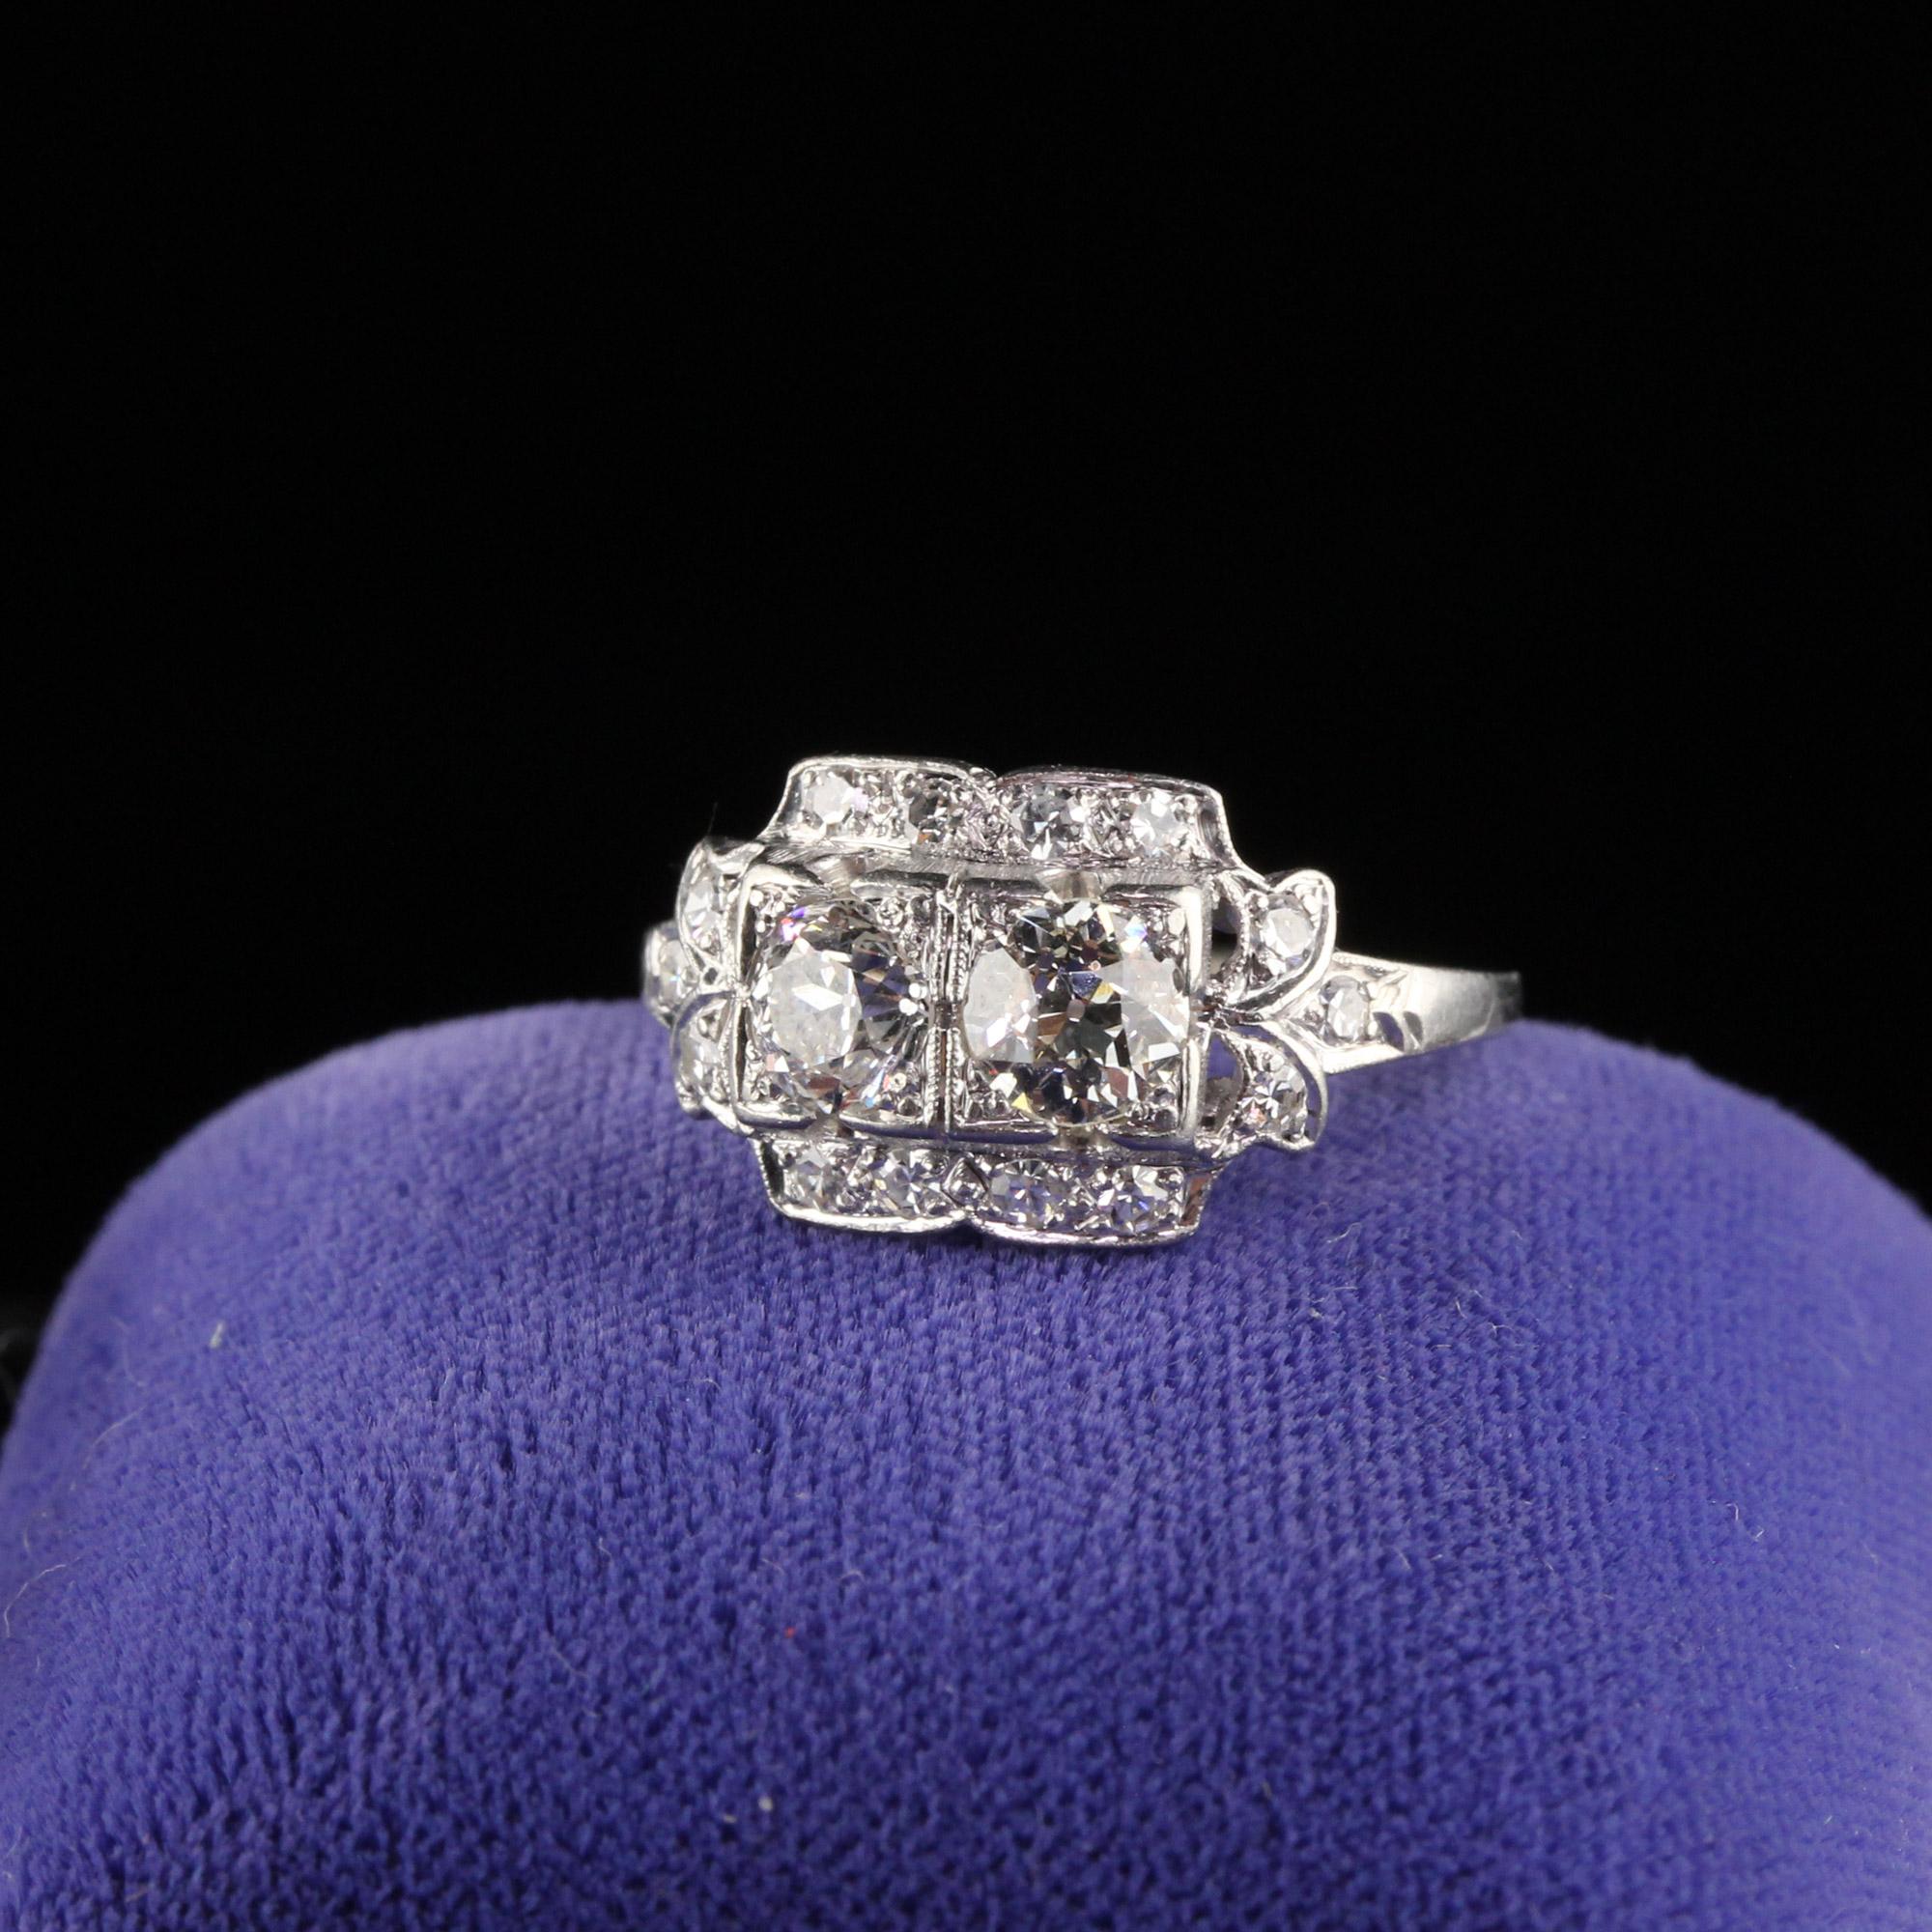 Beautiful Art Deco platinum Diamond engagement ring with two Old European shape diamonds in the center.

Item #R0448

Metal: Platinum

Weight: 3.5 Grams

Center Diamond Weight: Approximately 0.75 cts 

Total Diamond Weight: Approximately 1.00  cts